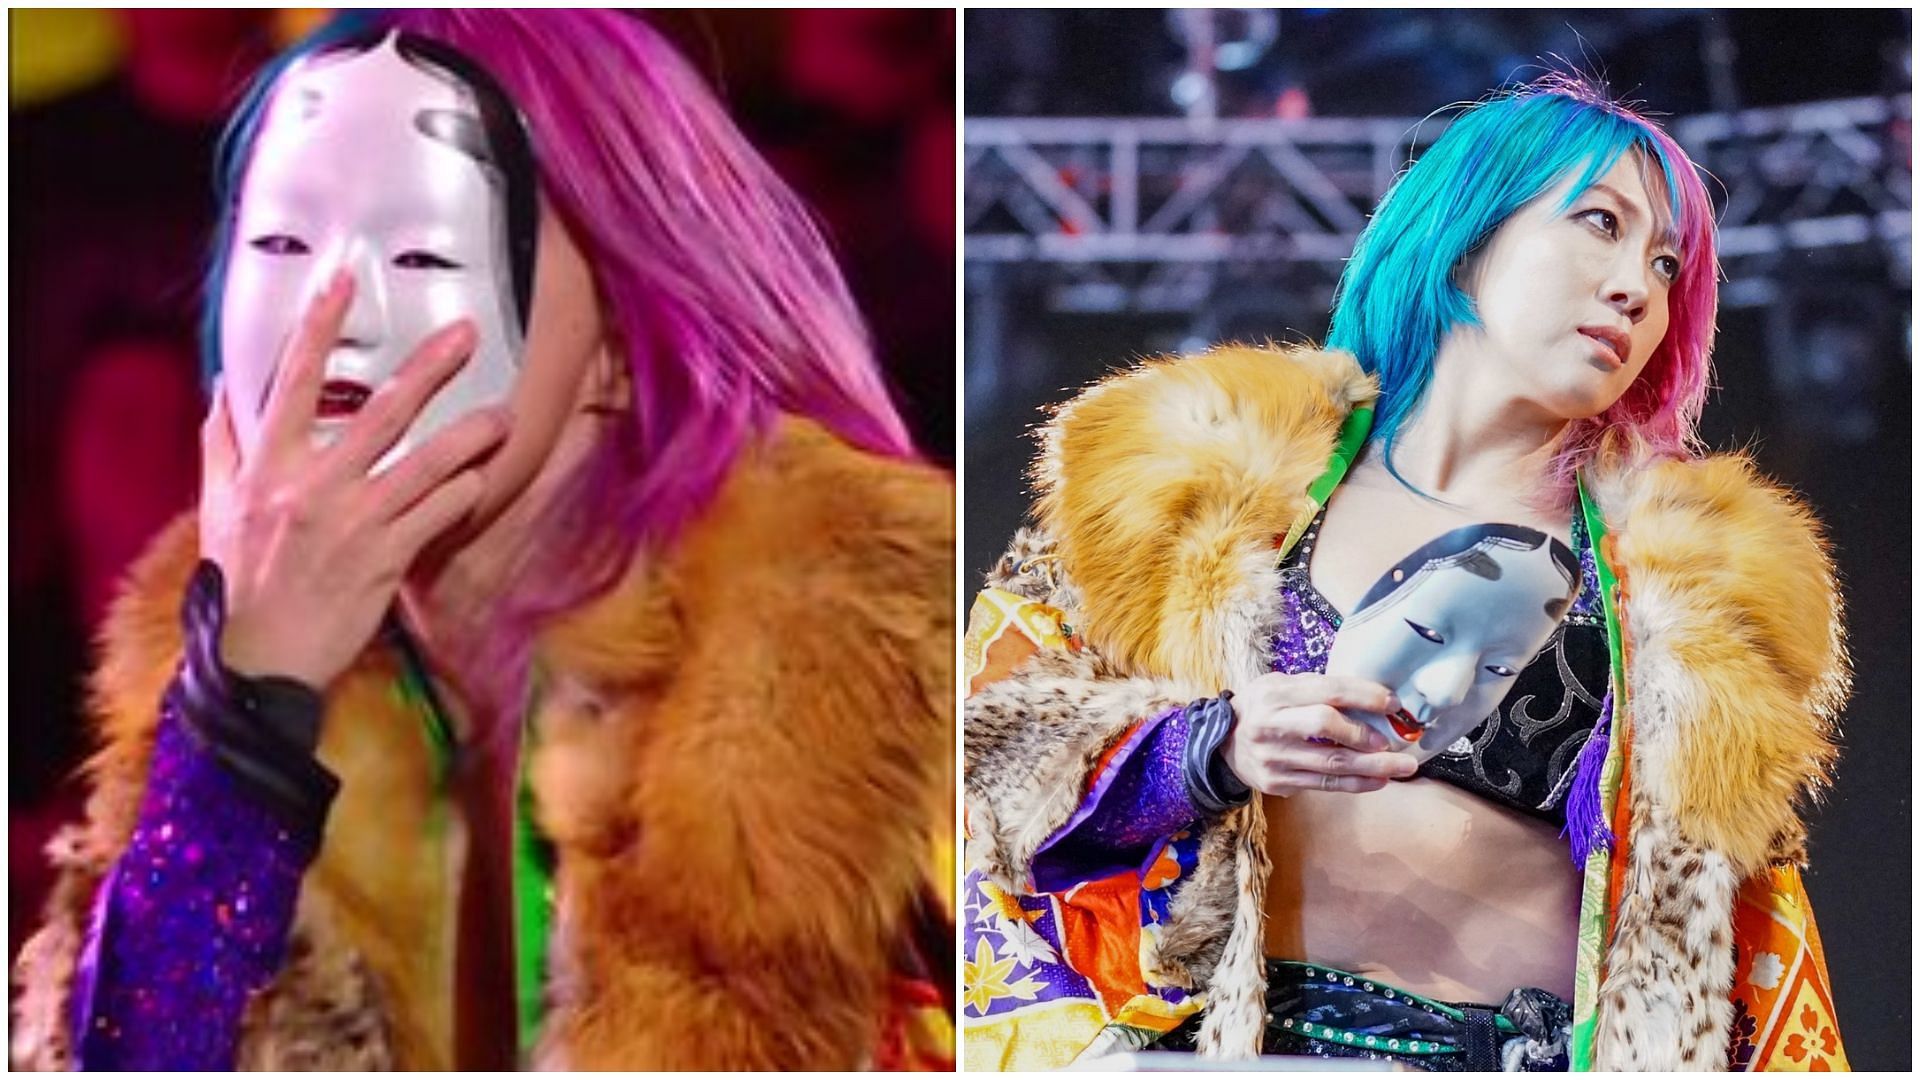 Asuka is currently on a break from WWE.